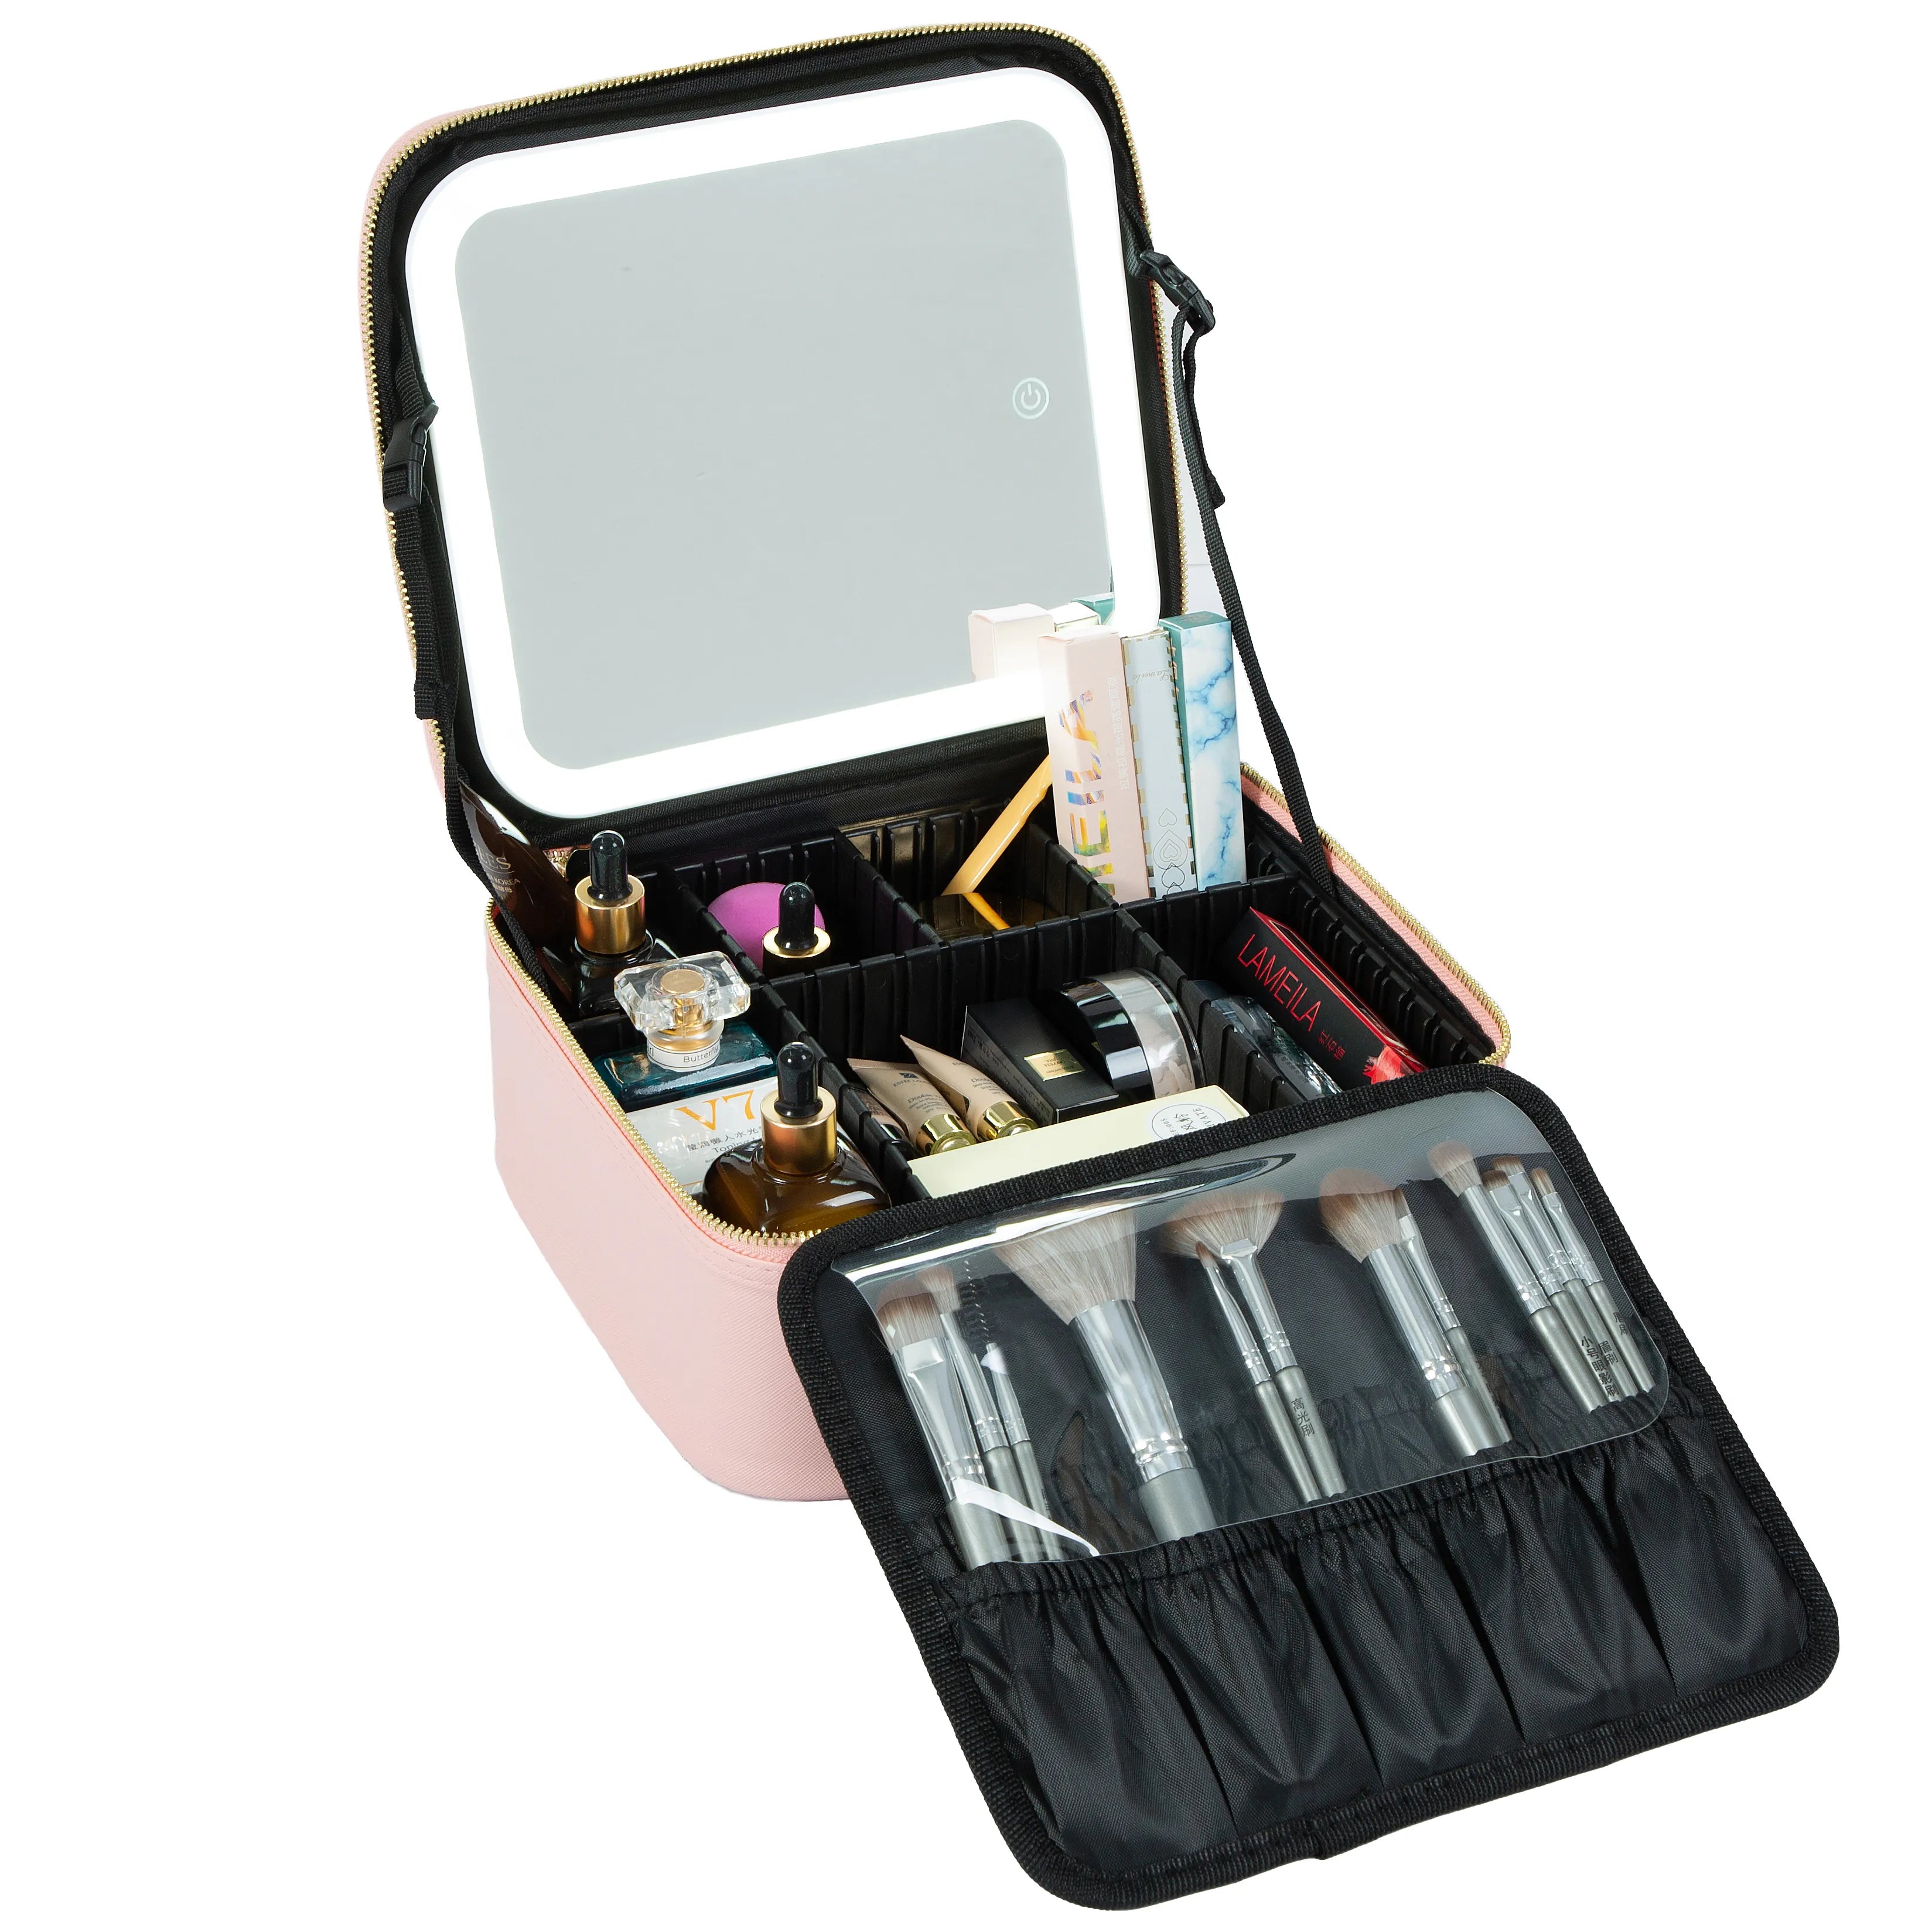 Makeup Train Case LED Mirror Cosmetic Travel Case travel bag